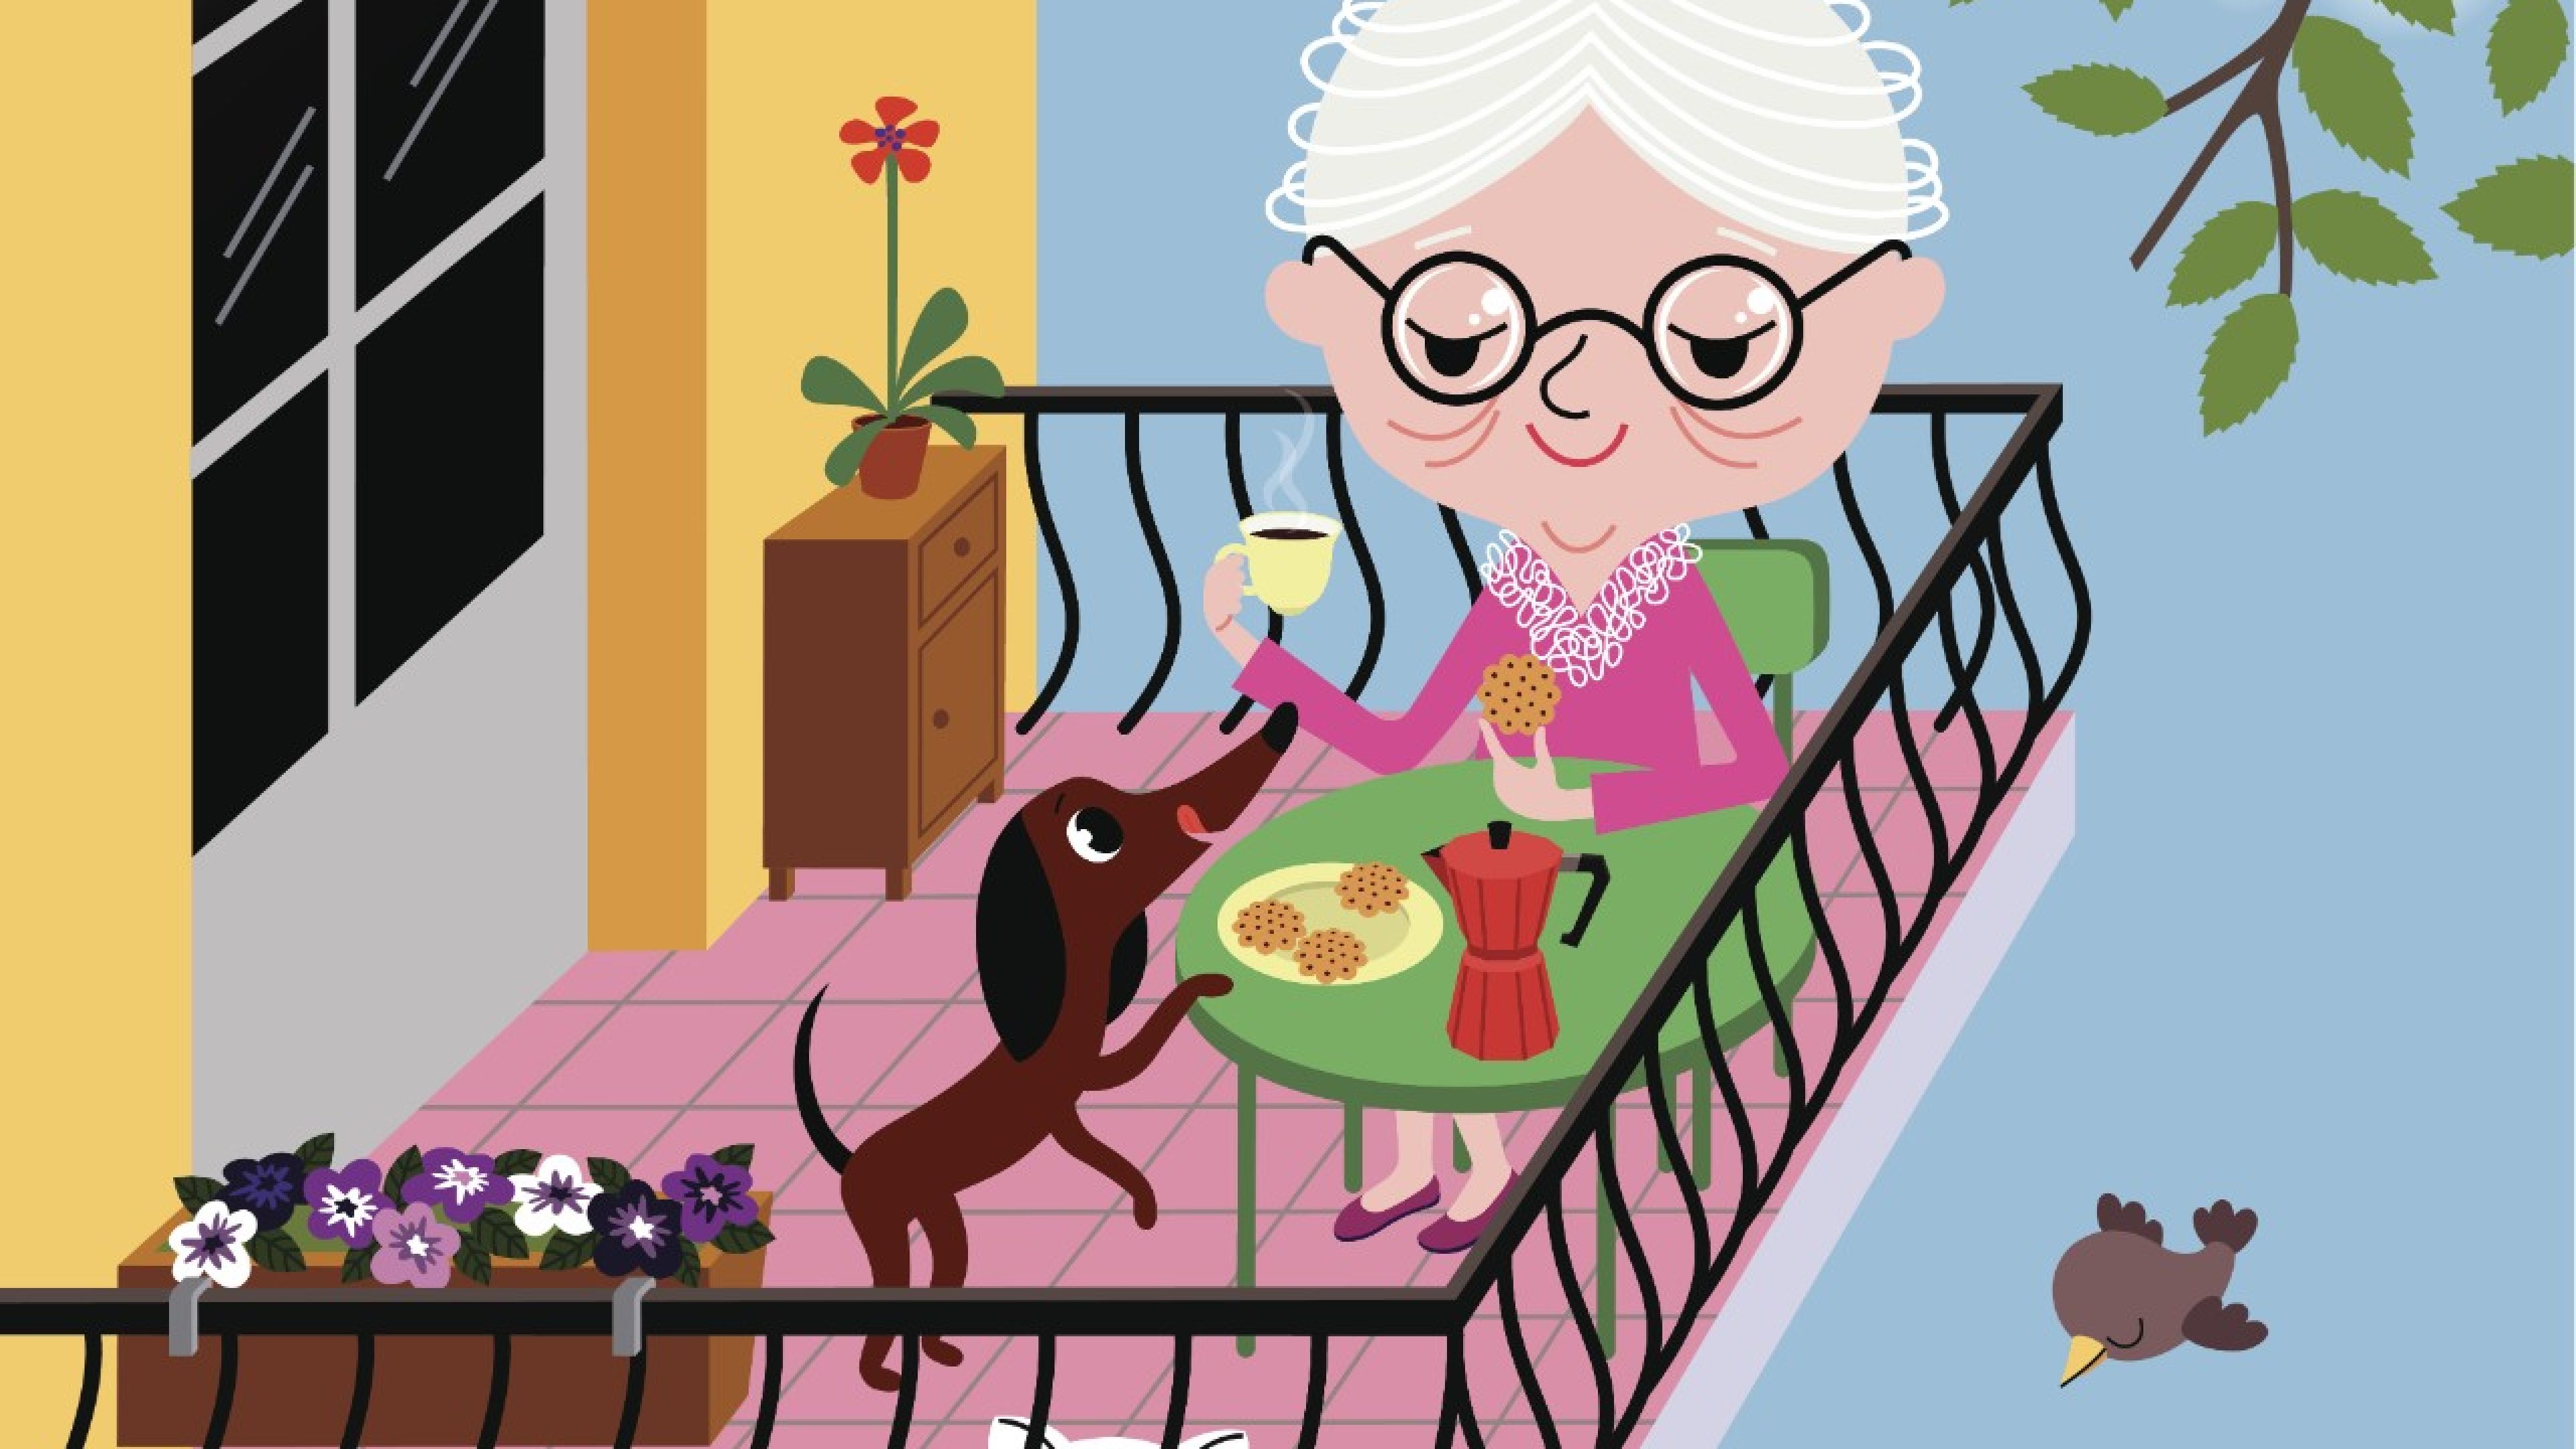 Little Old Lady with her Pets enjoying Summer on the Balcony.
Please see more similar images here:[url=http://www.istockphoto.com/file_search.php?action=file&lightboxID=8234435]
[img]http://s700.photobucket.com/albums/ww8/bi_bi/lightboxes/lifestyle.jpg[/img][/url] 